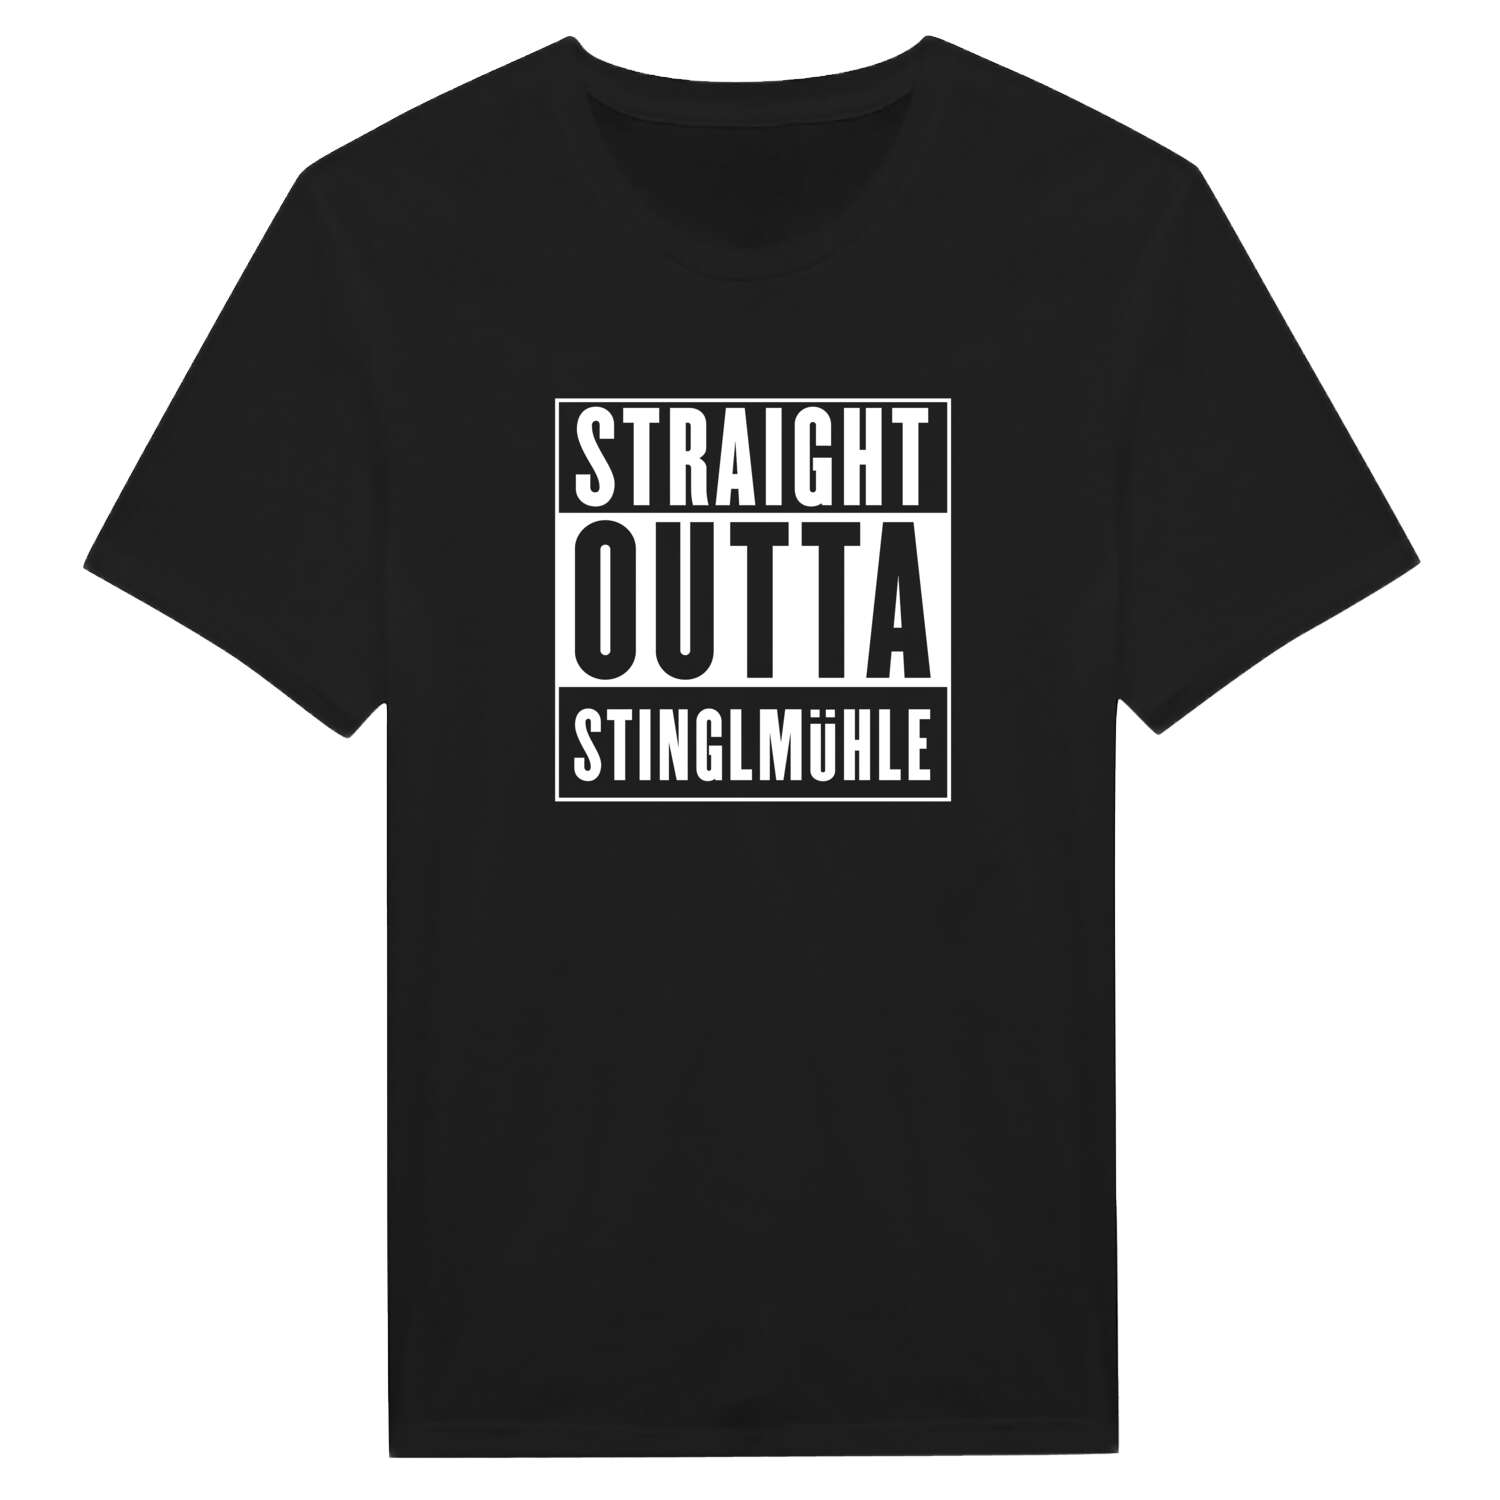 Stinglmühle T-Shirt »Straight Outta«